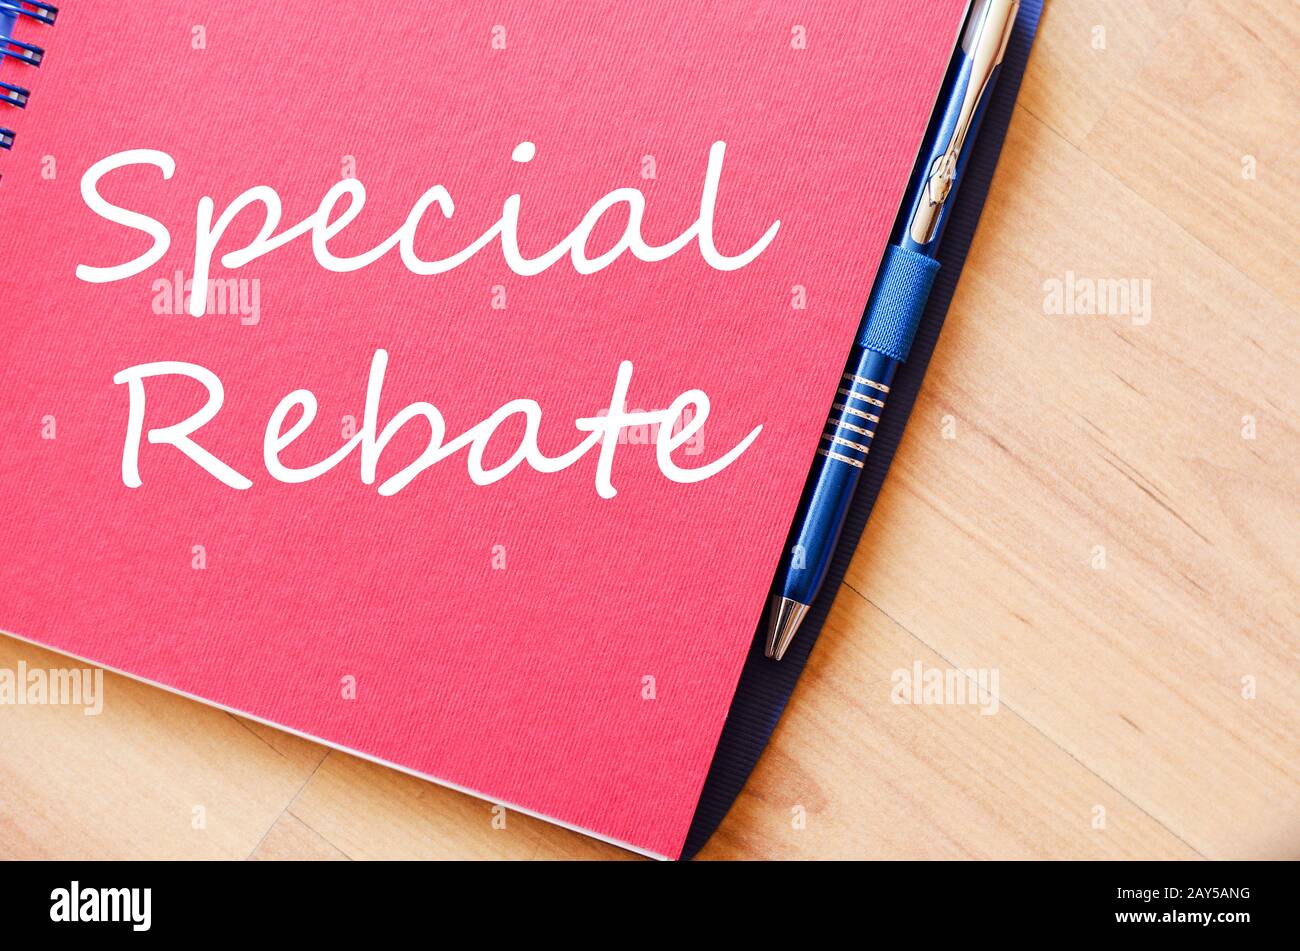 special-rebate-write-on-notebook-stock-photo-alamy